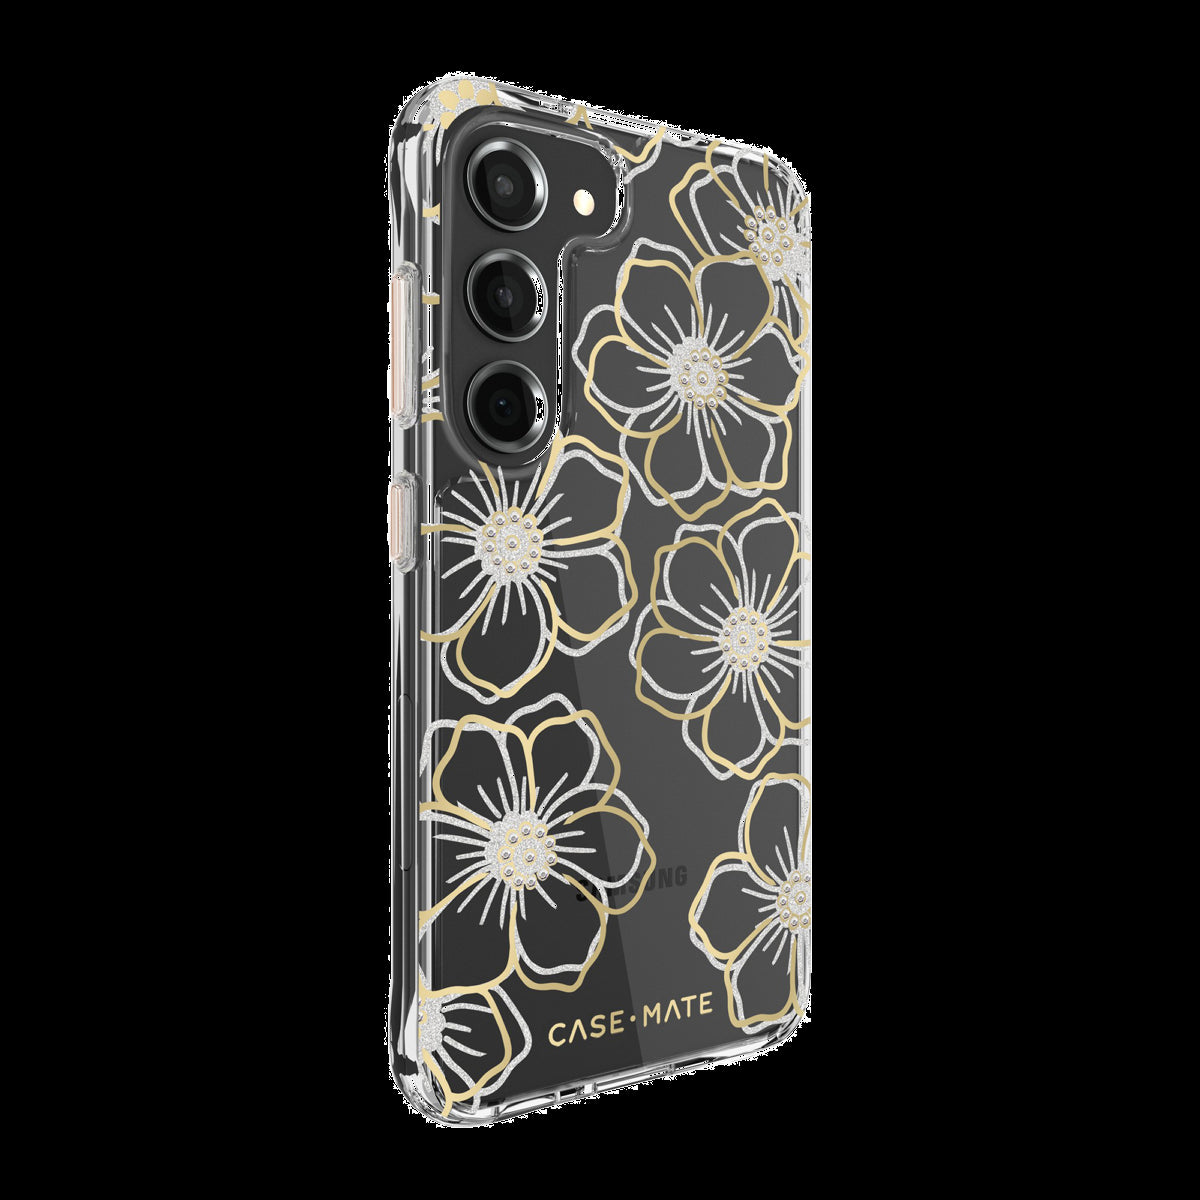 The Case-Mate Floral Gems case features an eye-catching metallic foil floral design paired with recessed gemstones which beautifully completements your device.